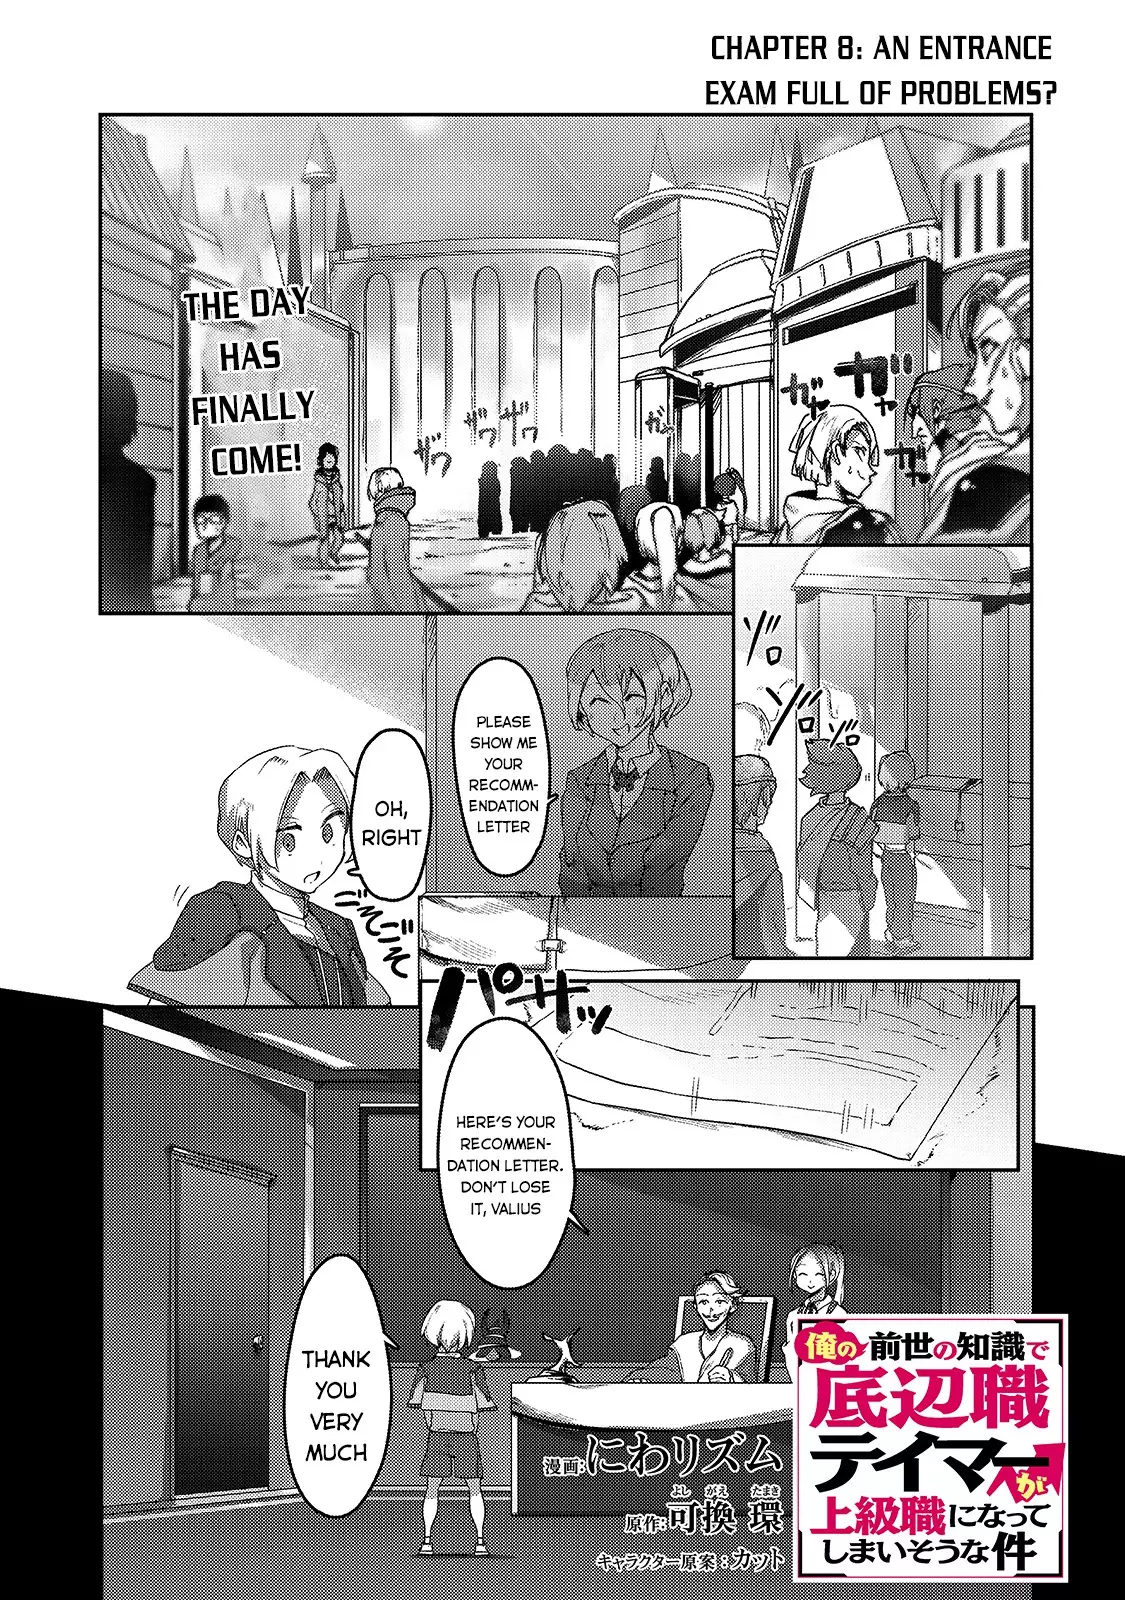 The Useless Tamer Will Turn Into The Top Unconsciously By My Previous Life Knowledge - 8 page 2